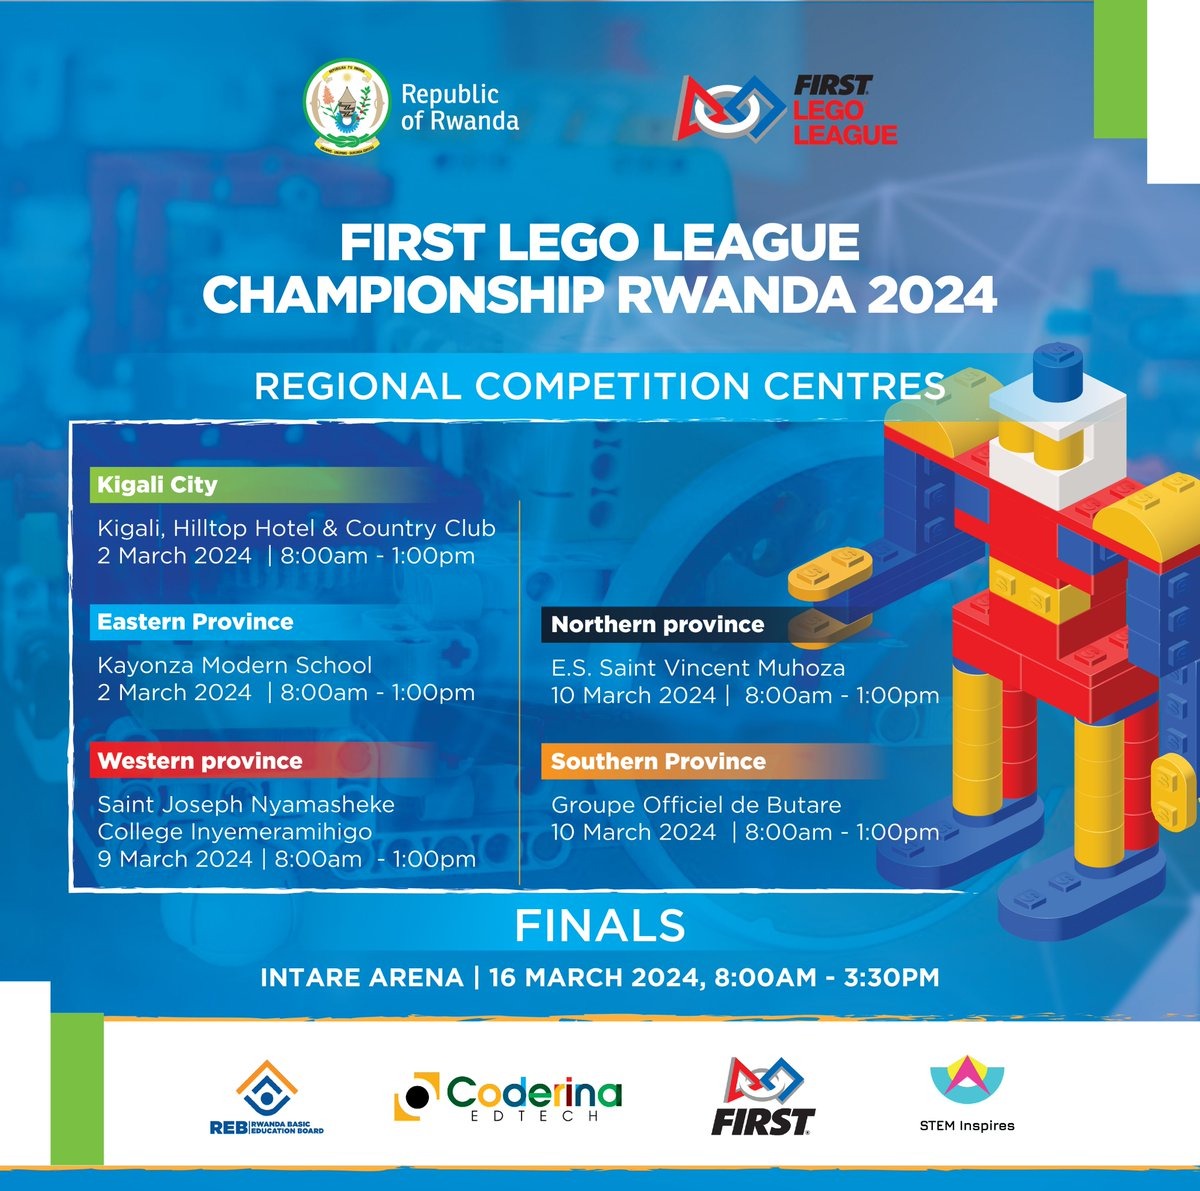 After months of preparations, the final #FirstLegoLeague Rwanda Championship is happening this Saturday @IntareArena! Stay tuned and may the best team win!